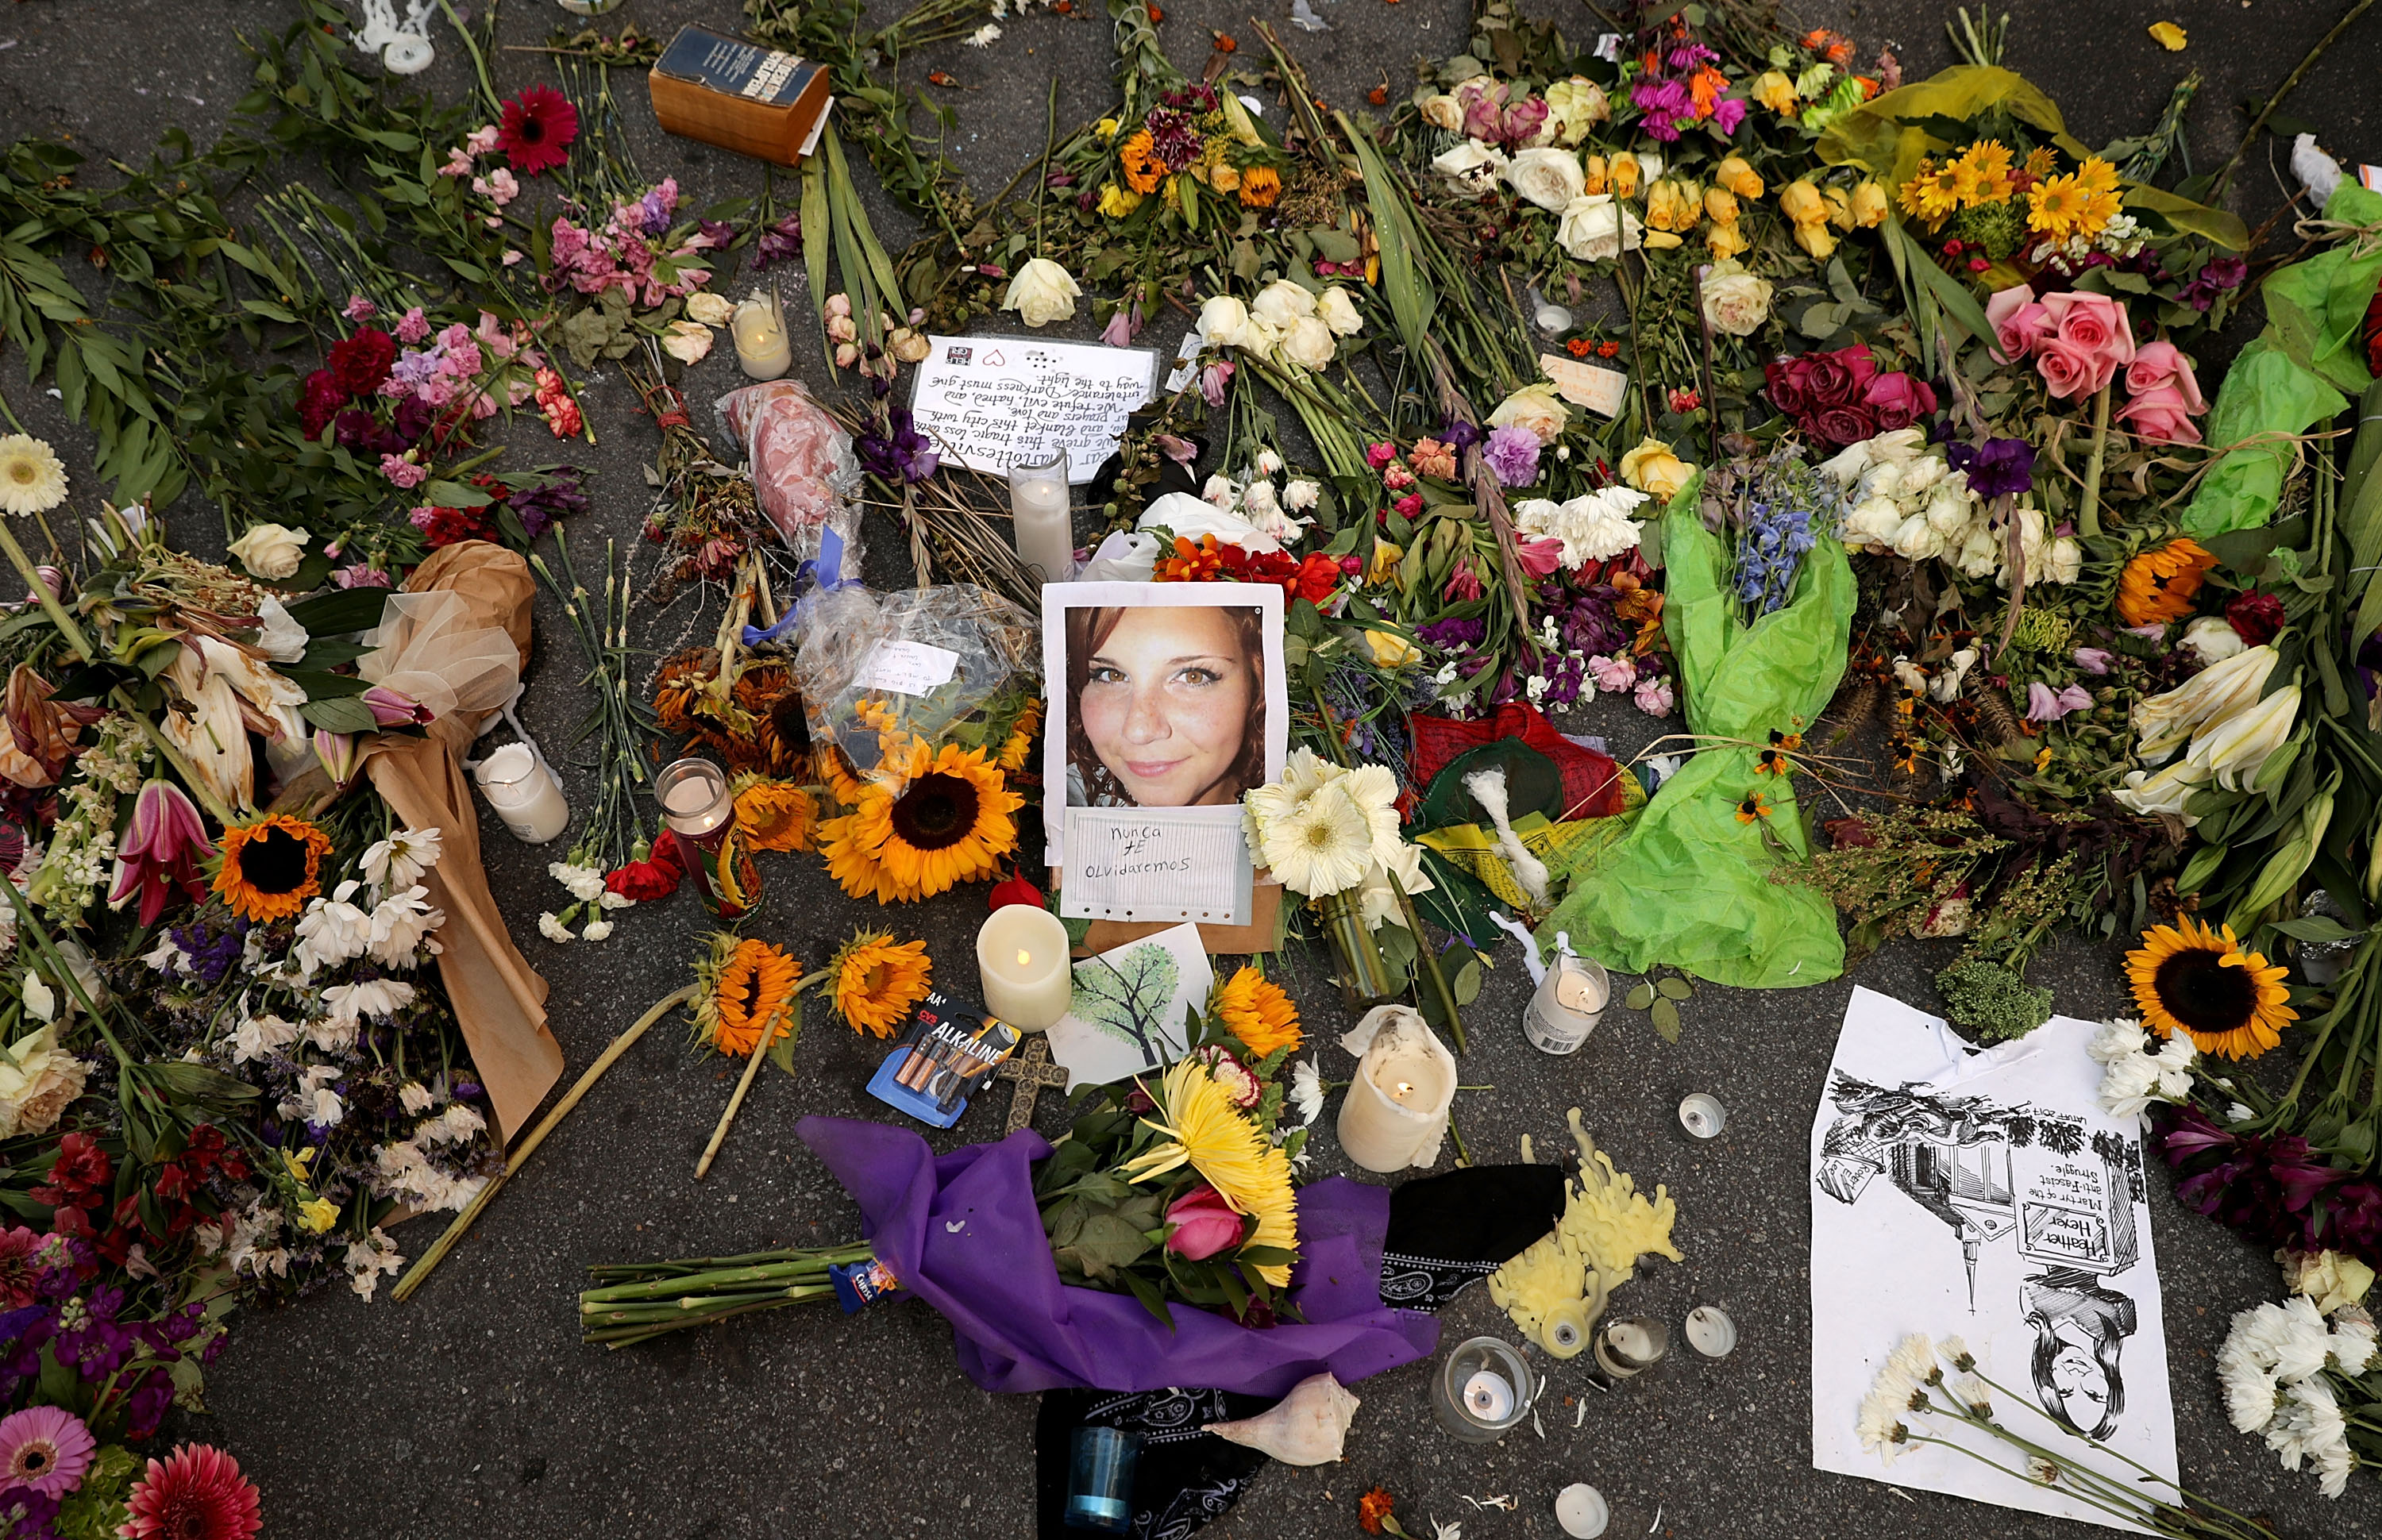 Memorial Held In Charlottesville For Heather Heyer, Victim Of Car Ramming Incident During Protest After White Supremacists’ Rally